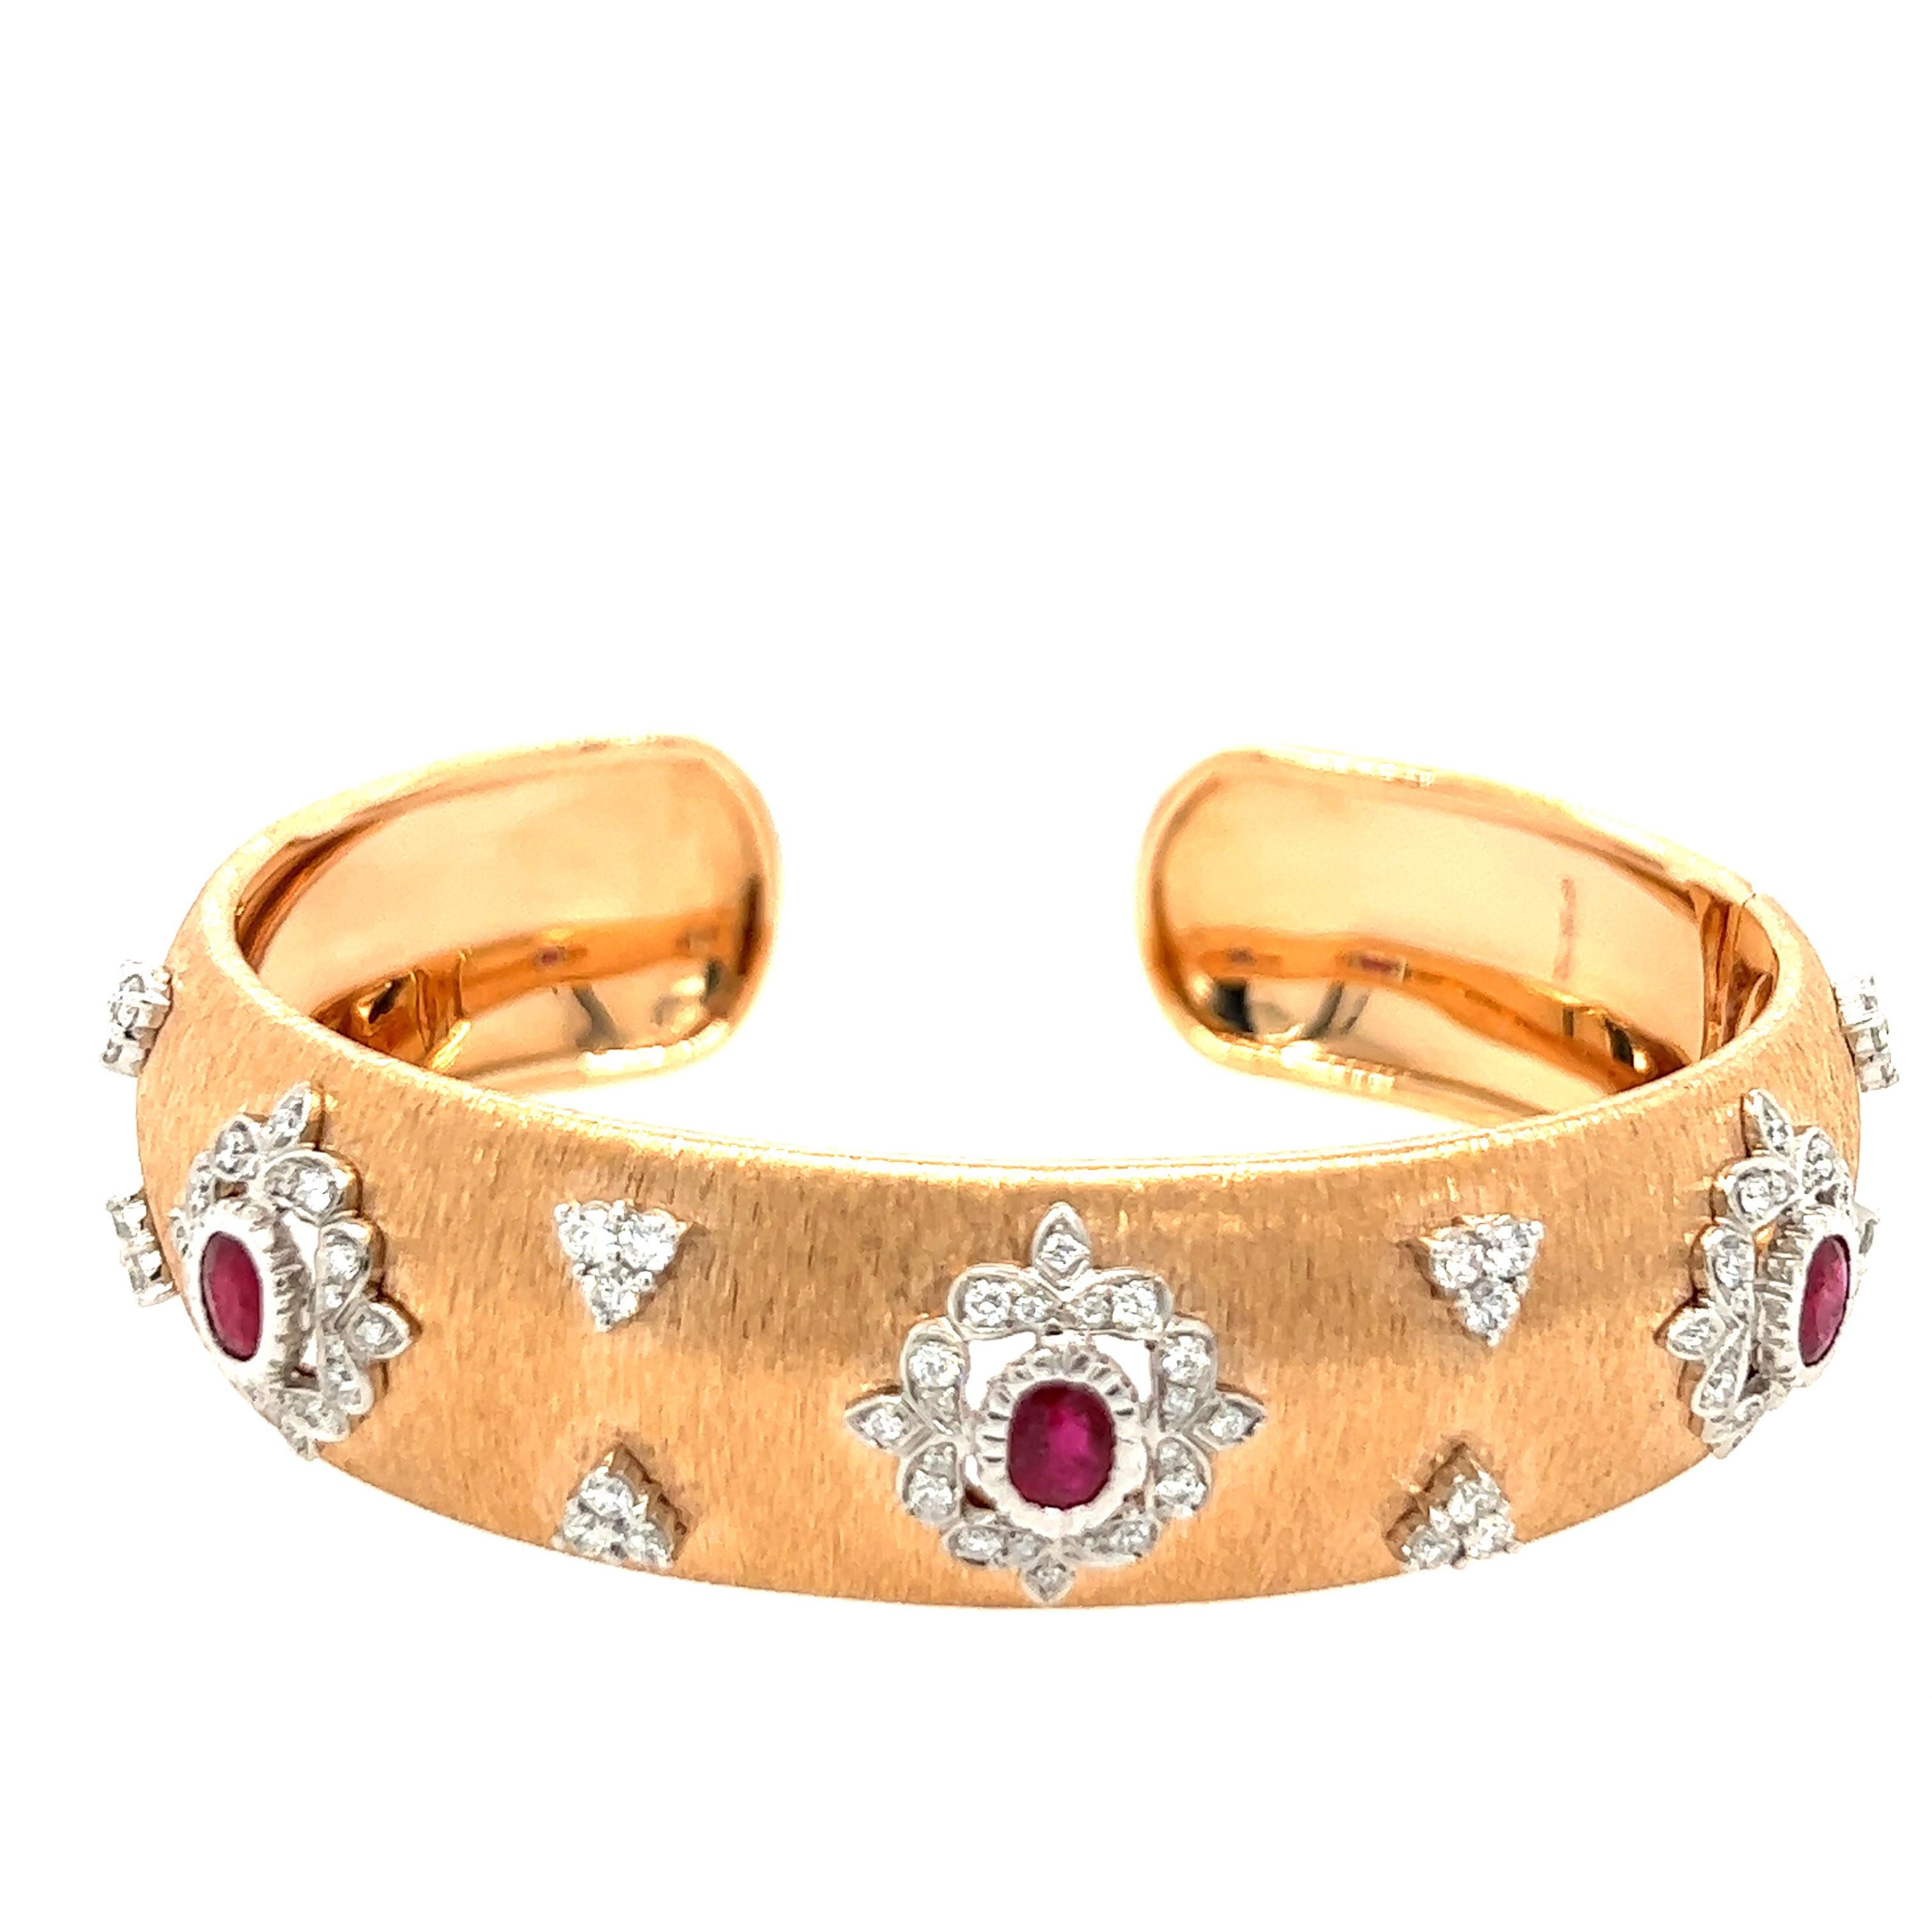 18K White & Rose Gold Artisan Ruby Diamond Bangle in Florentine Finish

18K White Gold and Rose Gold - 22.08 GM
3 Rubies - 1.37 CT
84 Diamonds - 1.04 CT

The family-owned company, Althoff Jewelry, has one mission – create elegant, luxurious and